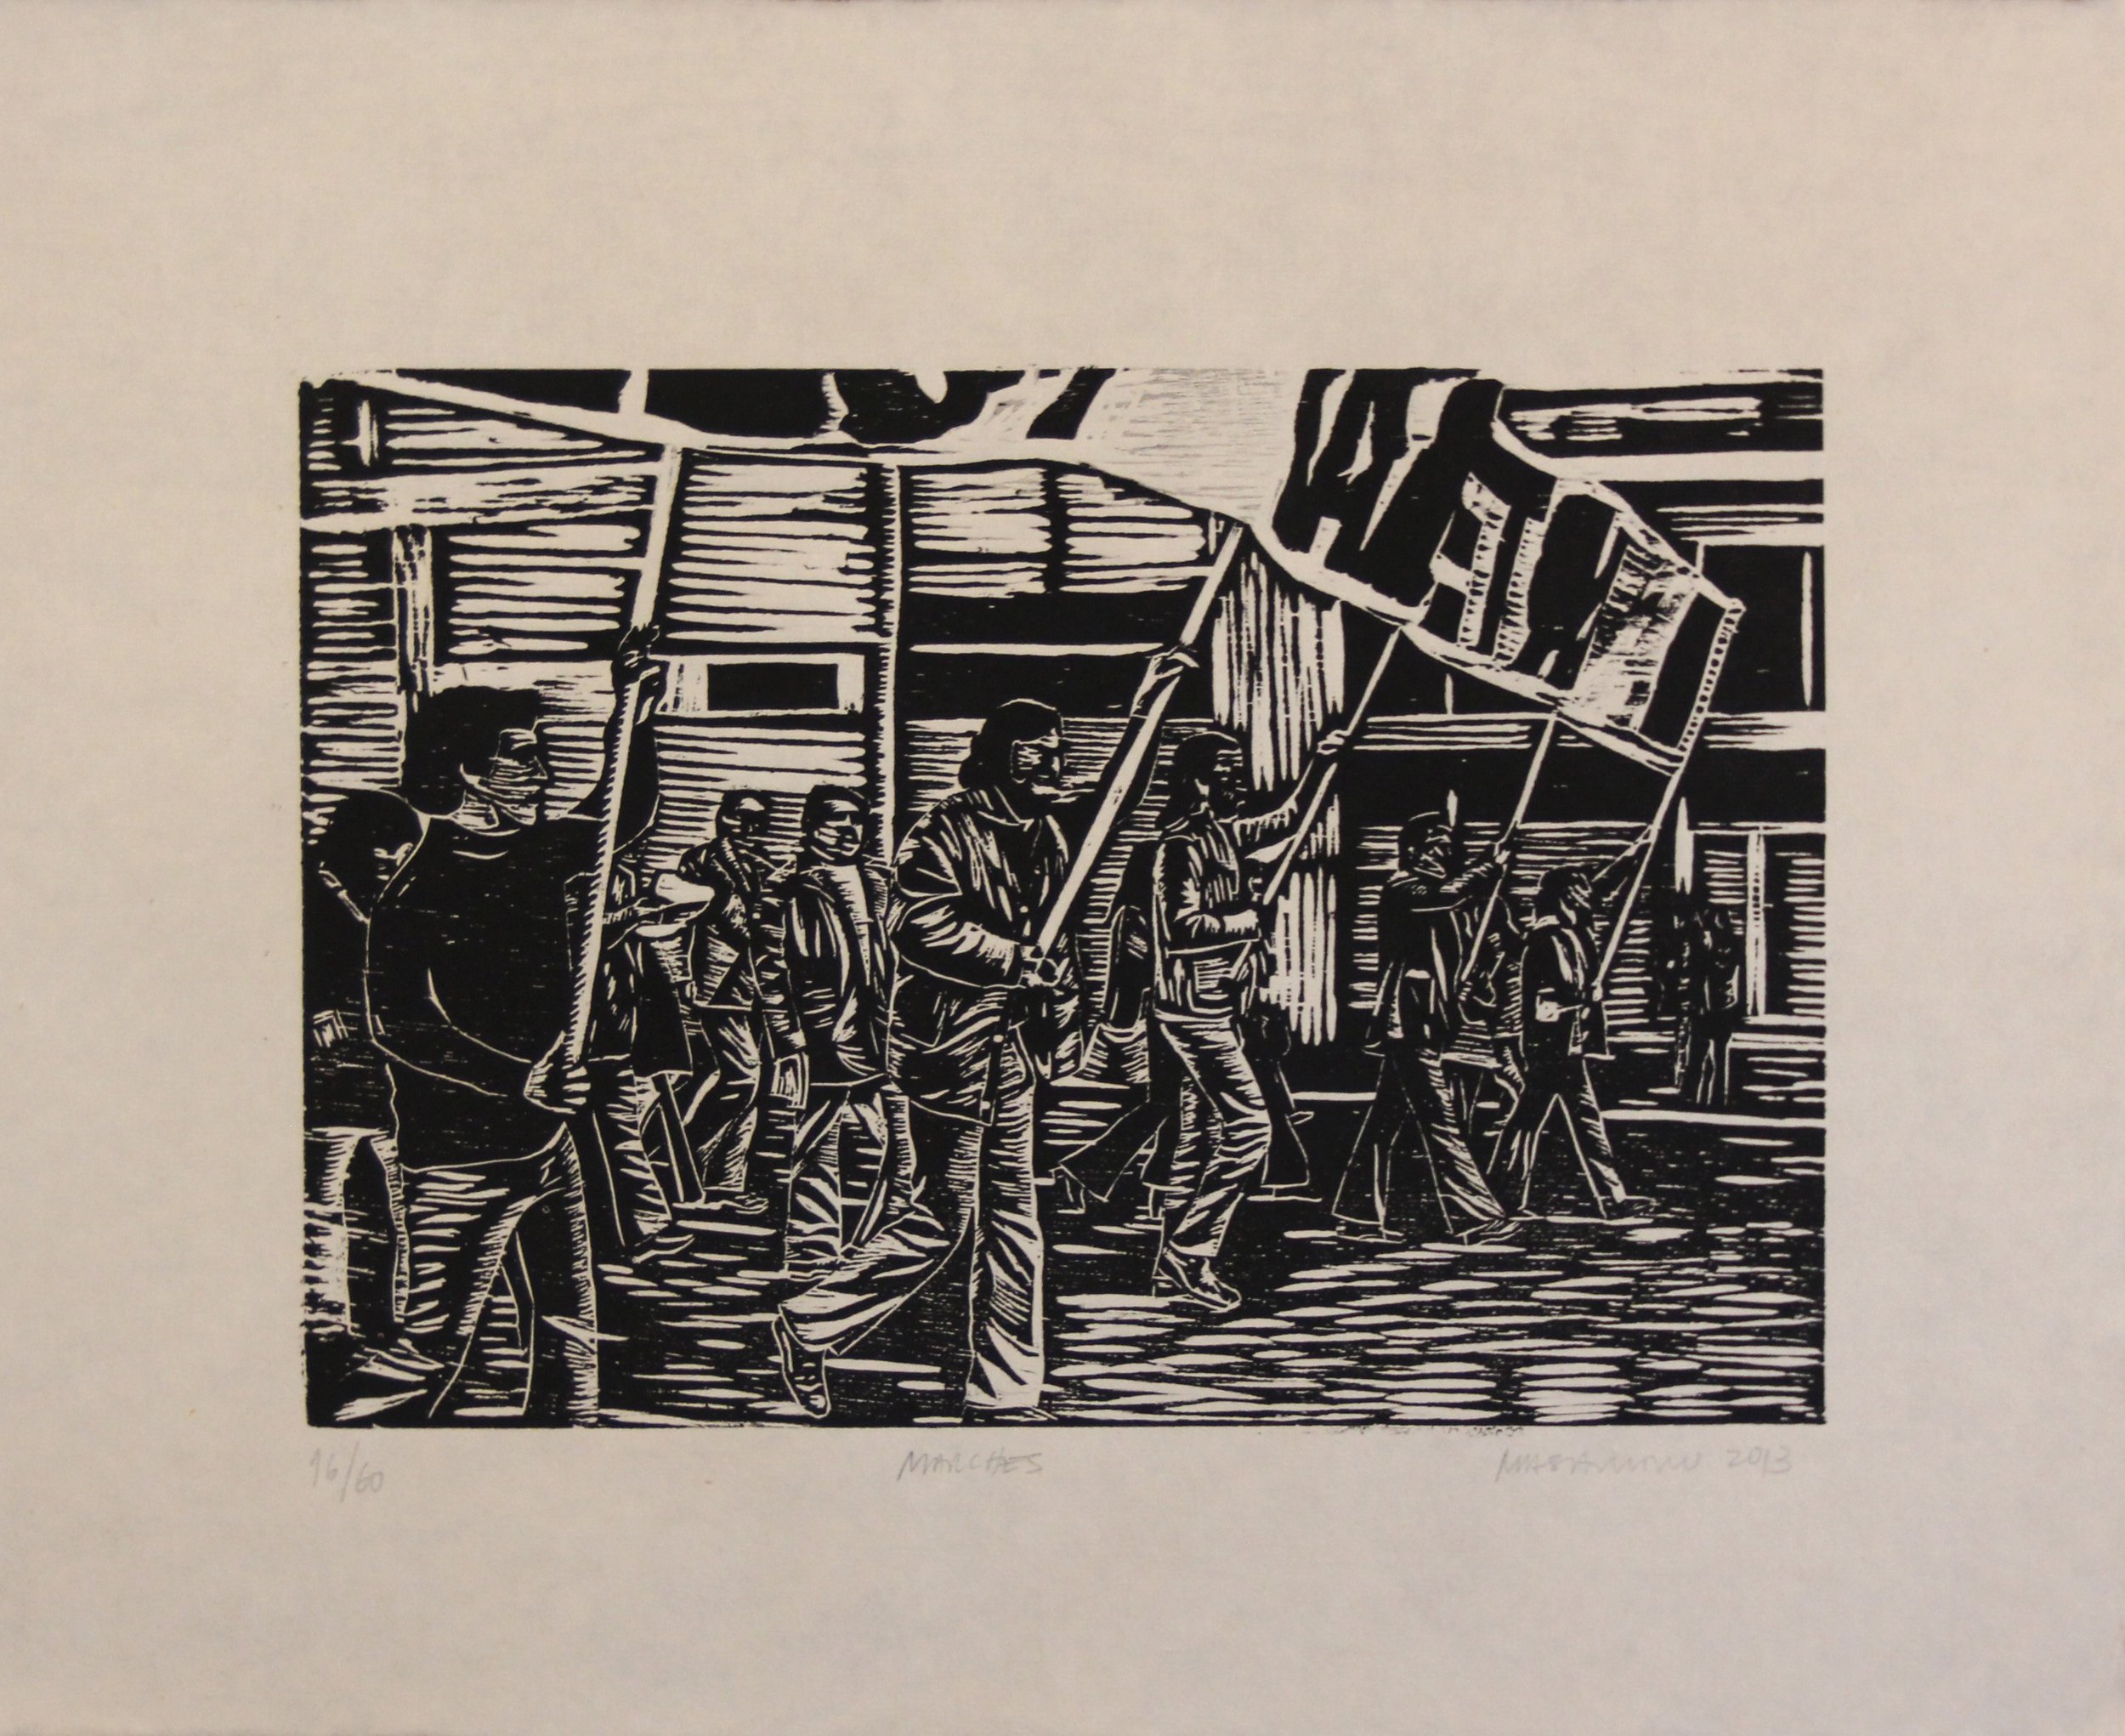 Memory and Landscape series_5. Marches_woodcut on japense paper_image 7_ x 10__paper 16_ x 20_.jpg